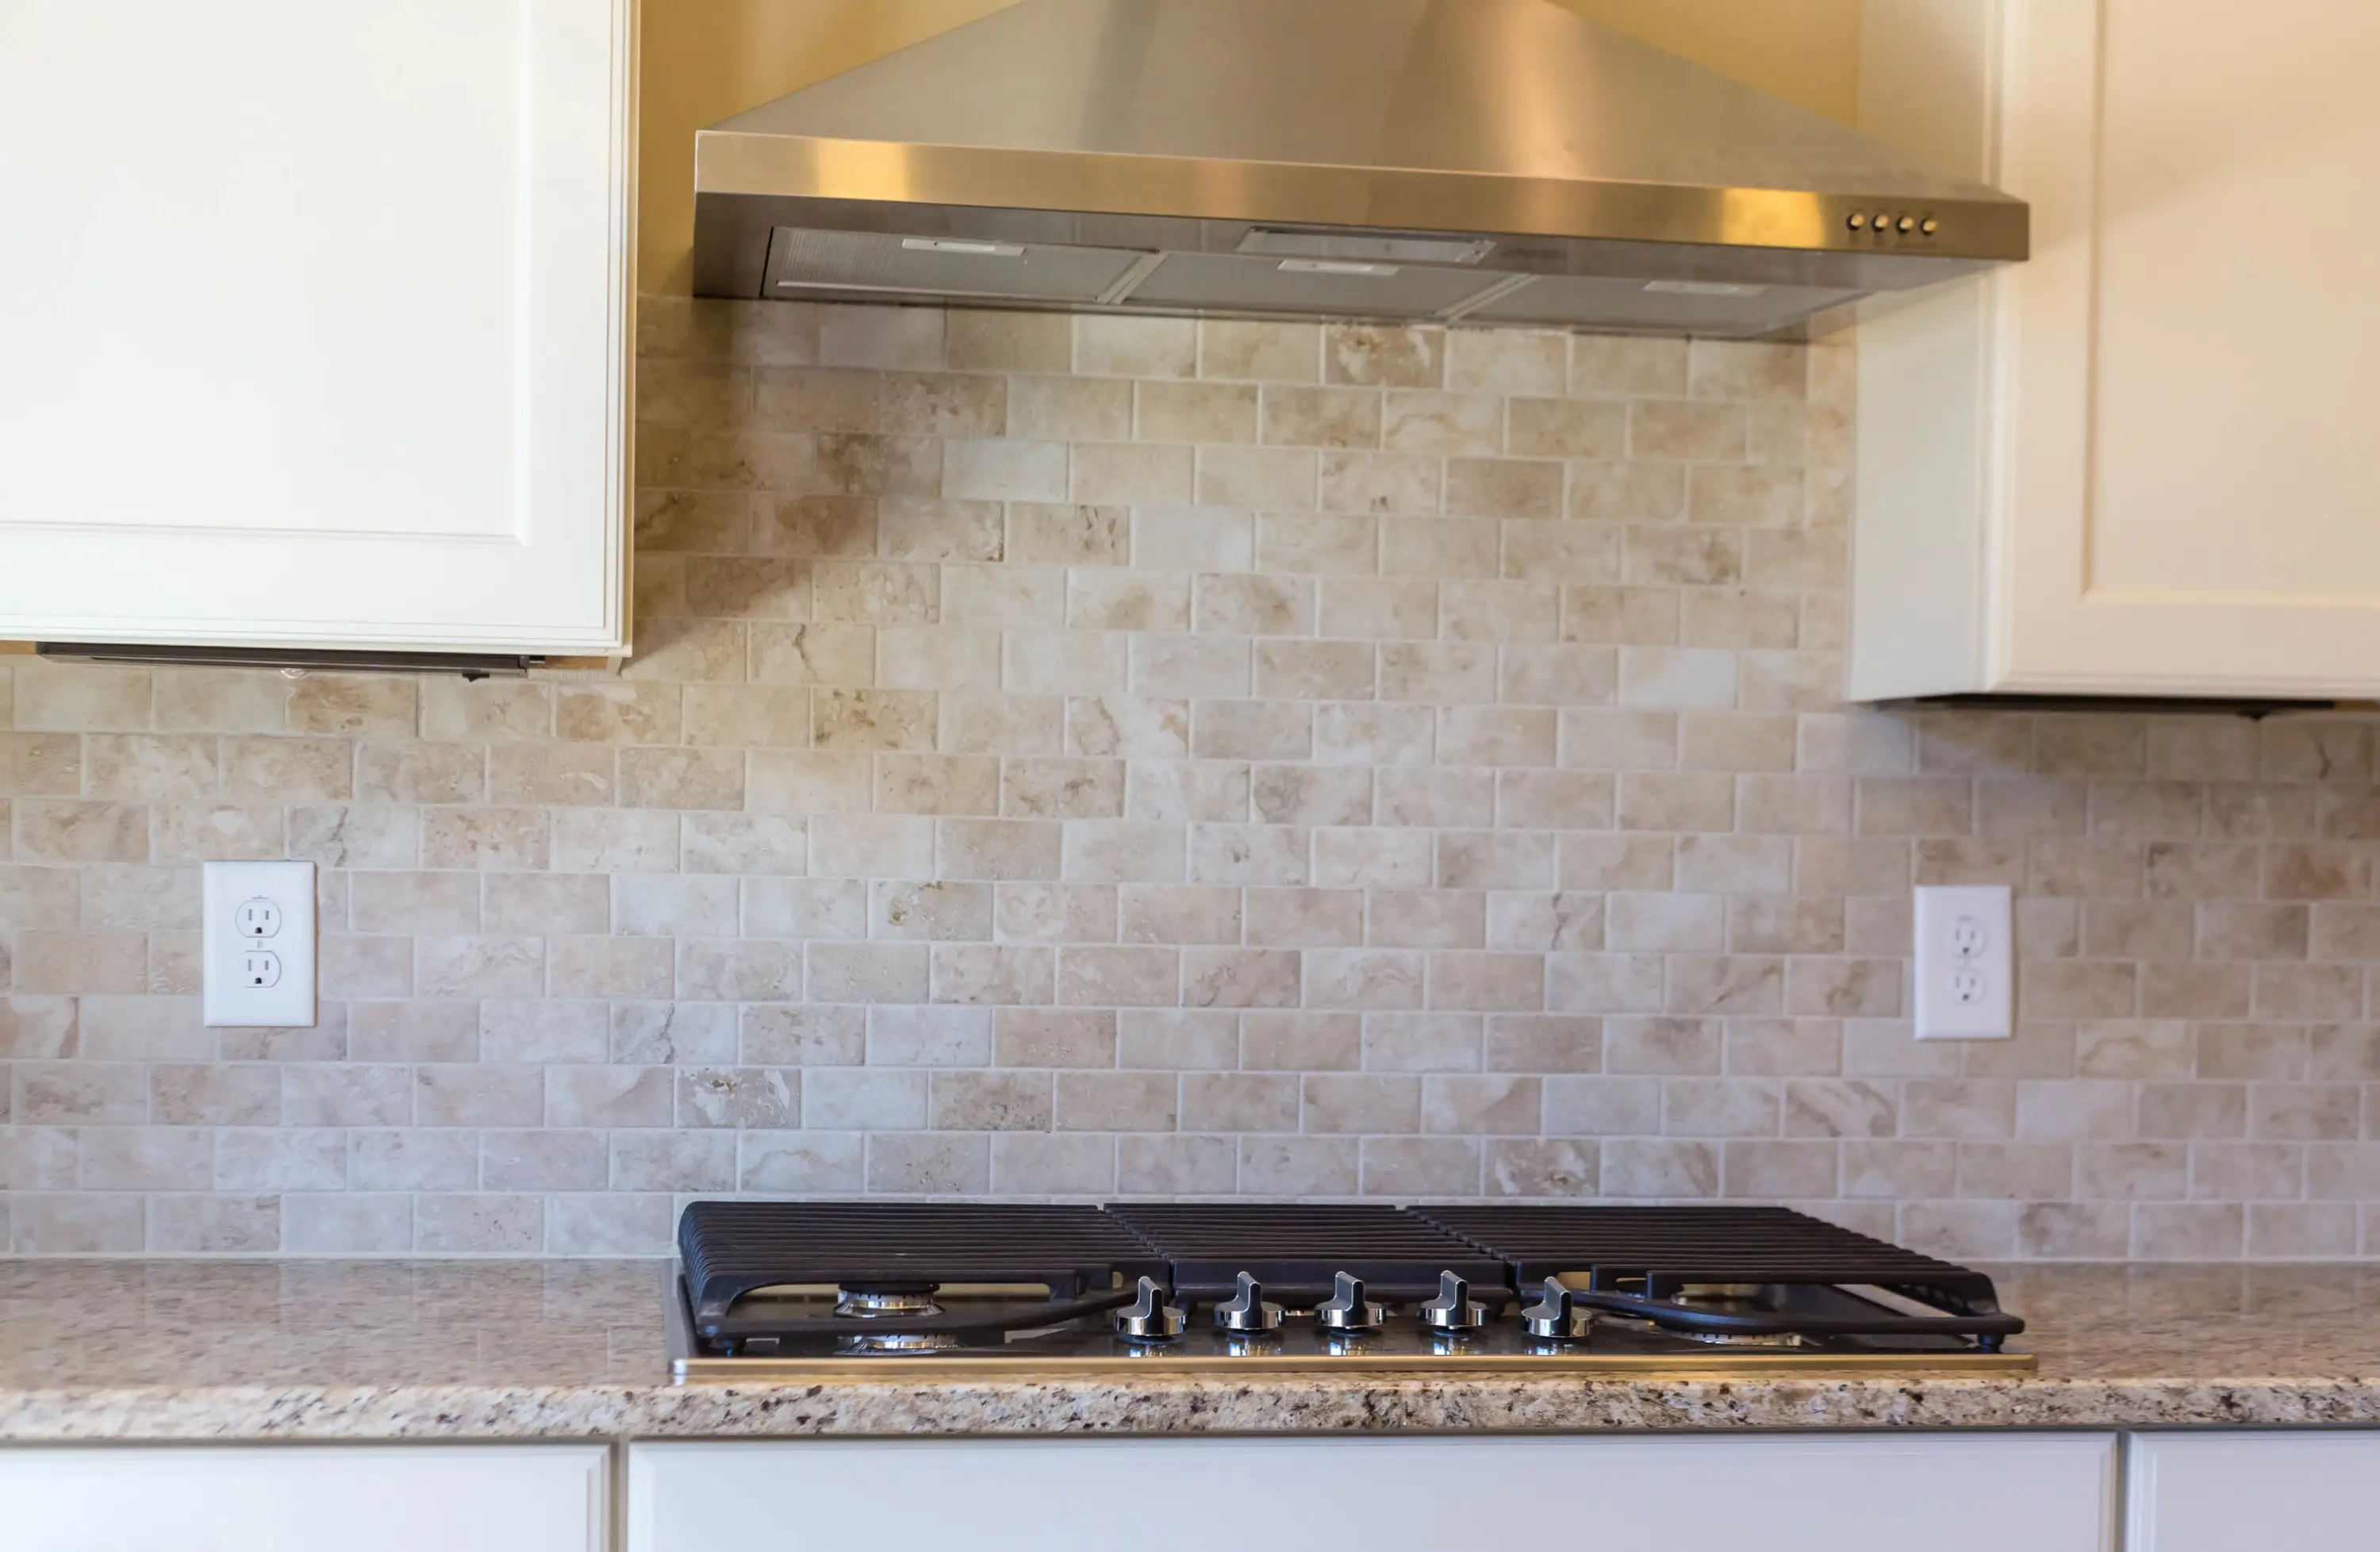 Full backsplash services for kitchens and bathrooms project in Fayetteville, NC.